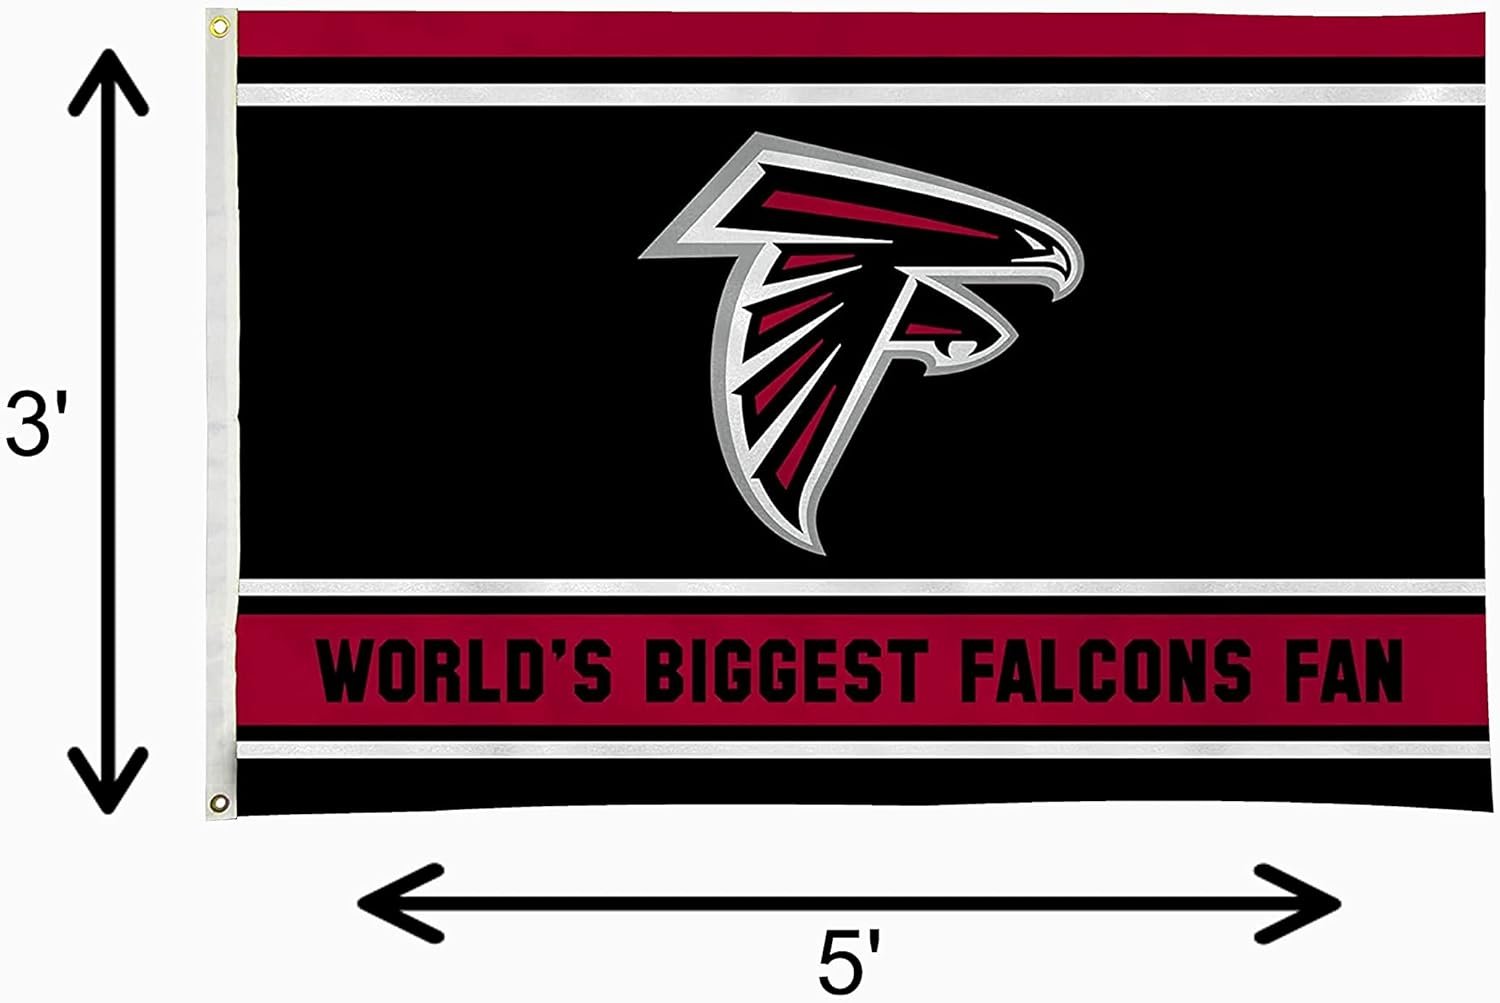 Atlanta Falcons 3x5 Feet Flag Banner, World's Biggest Fan, Metal Grommets, Single Sided, Indoor or Outdoor Use